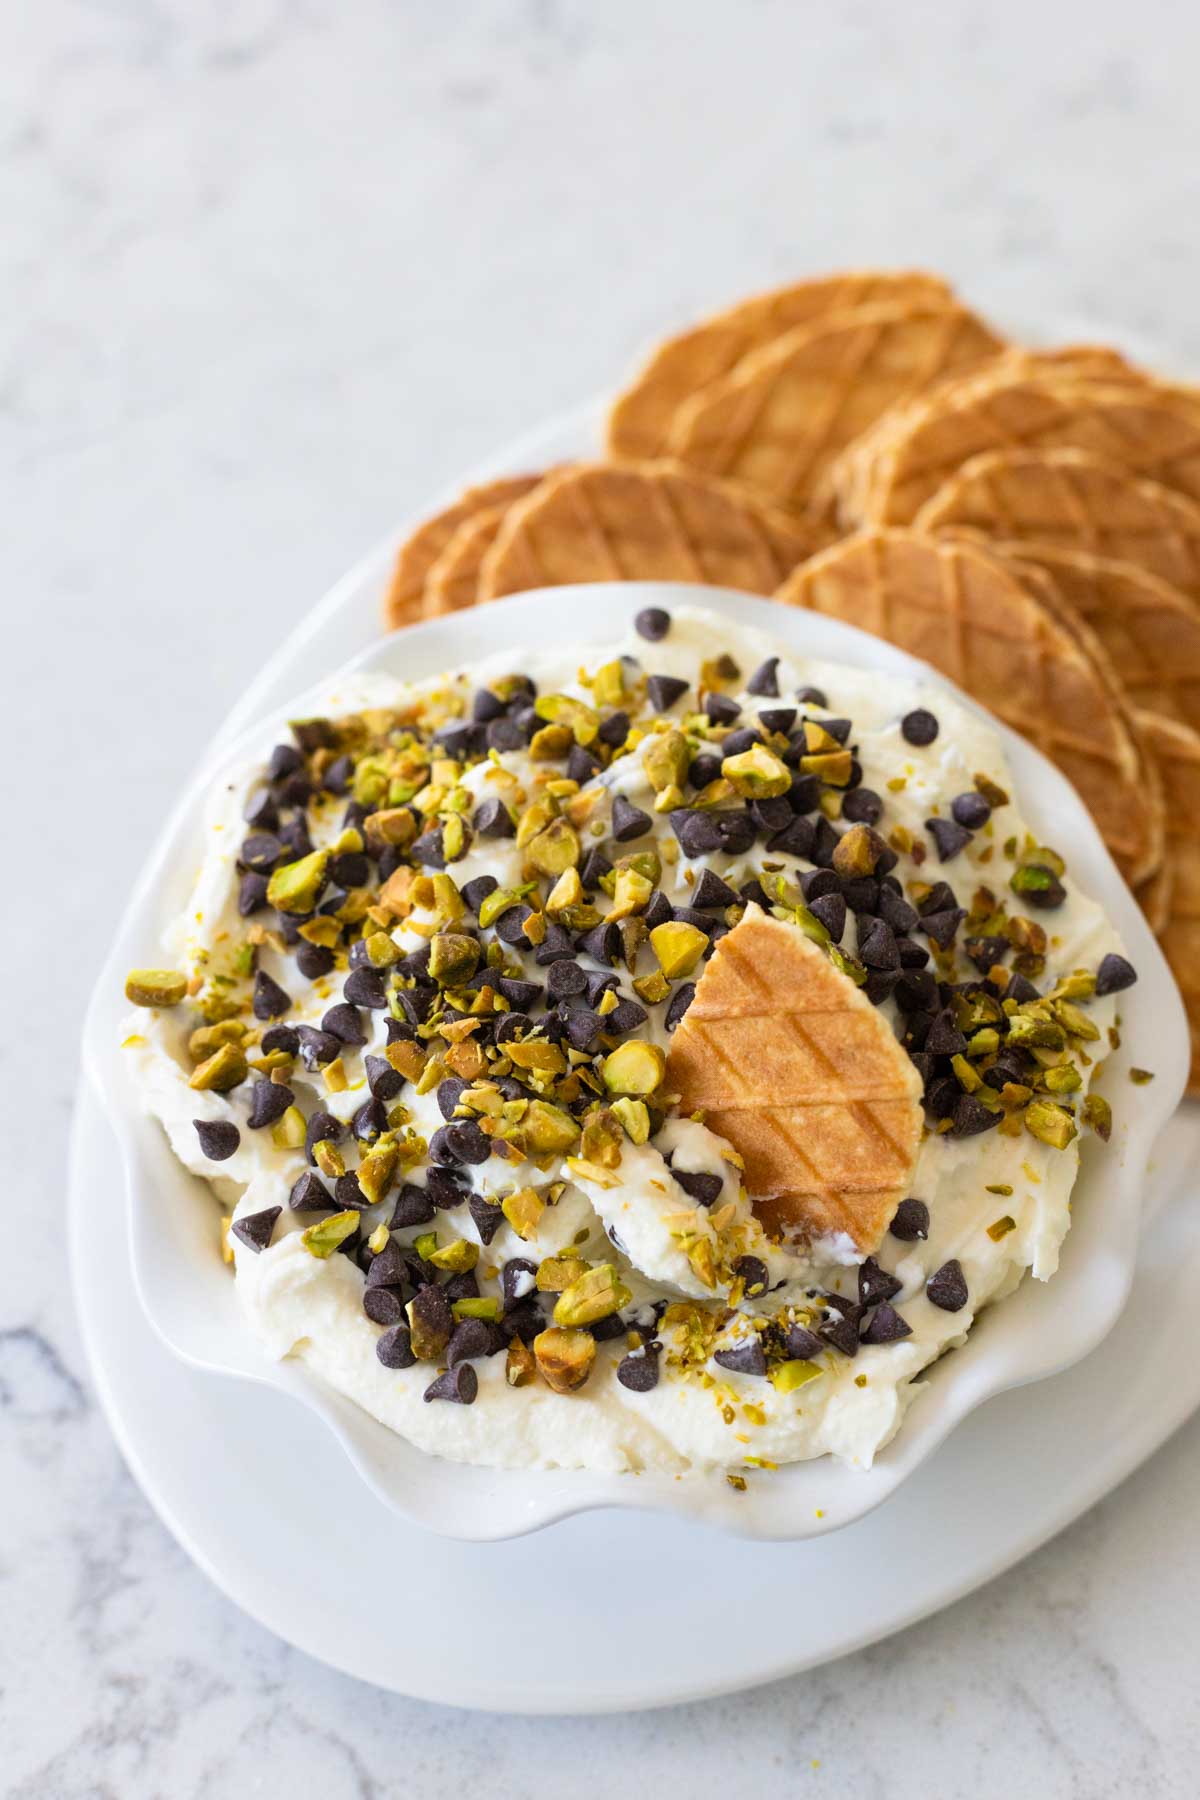 The authentic cannoli dip has chopped pistachios sprinkled on top for crunch.